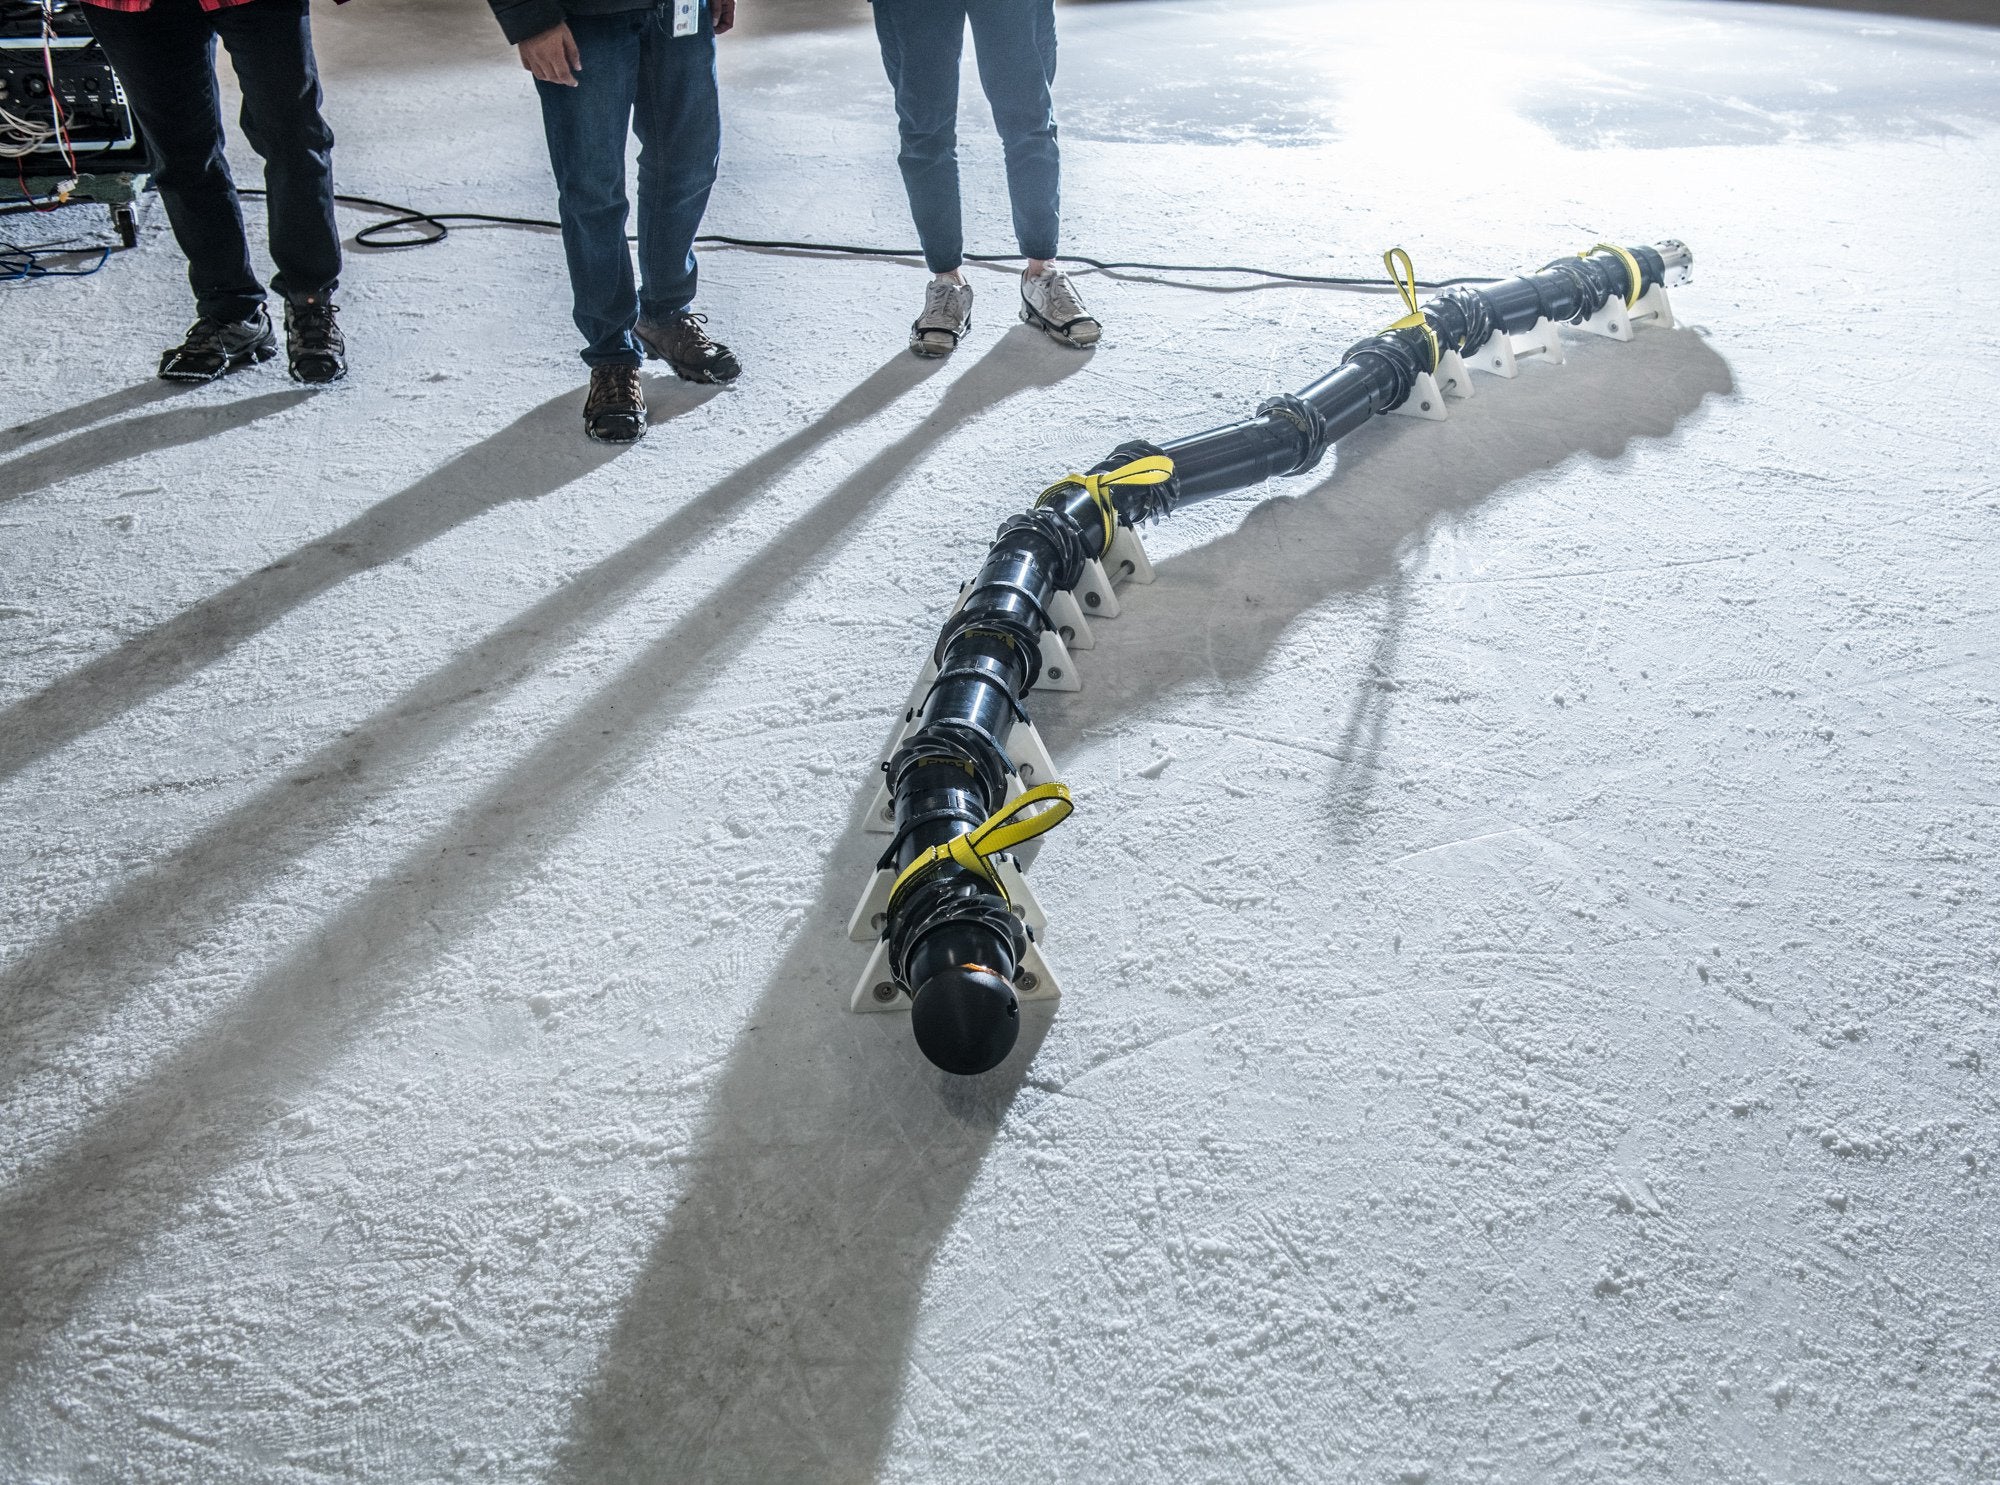 NASA EELS snake robot in ice skating rink next to researchers.